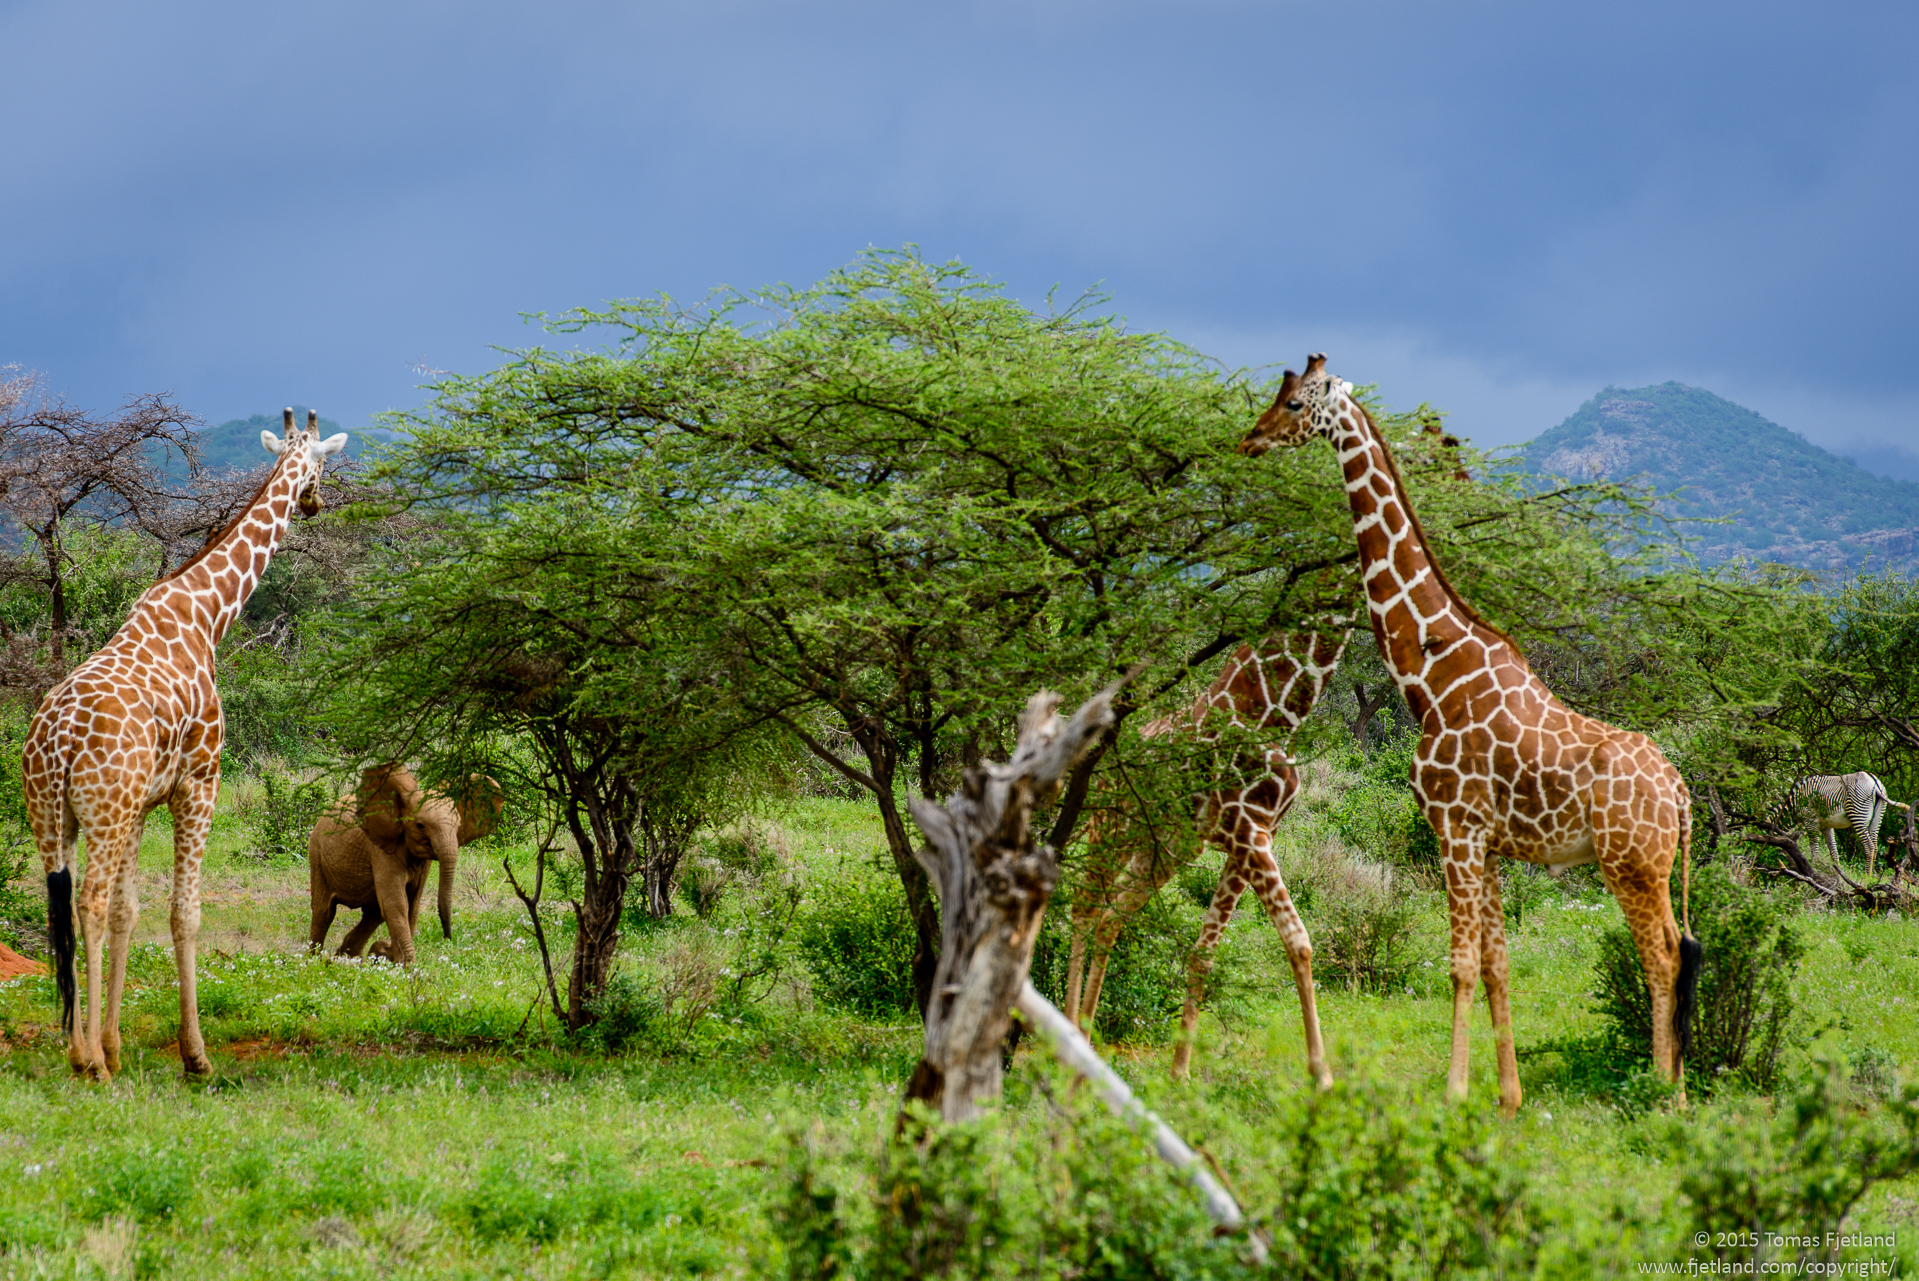 As we were photographing these giraffes, suddenly an elephant cub came running in trying to see how tall animals he could scare. Only one of the three trotted away, which seemed more like playing along than anything else